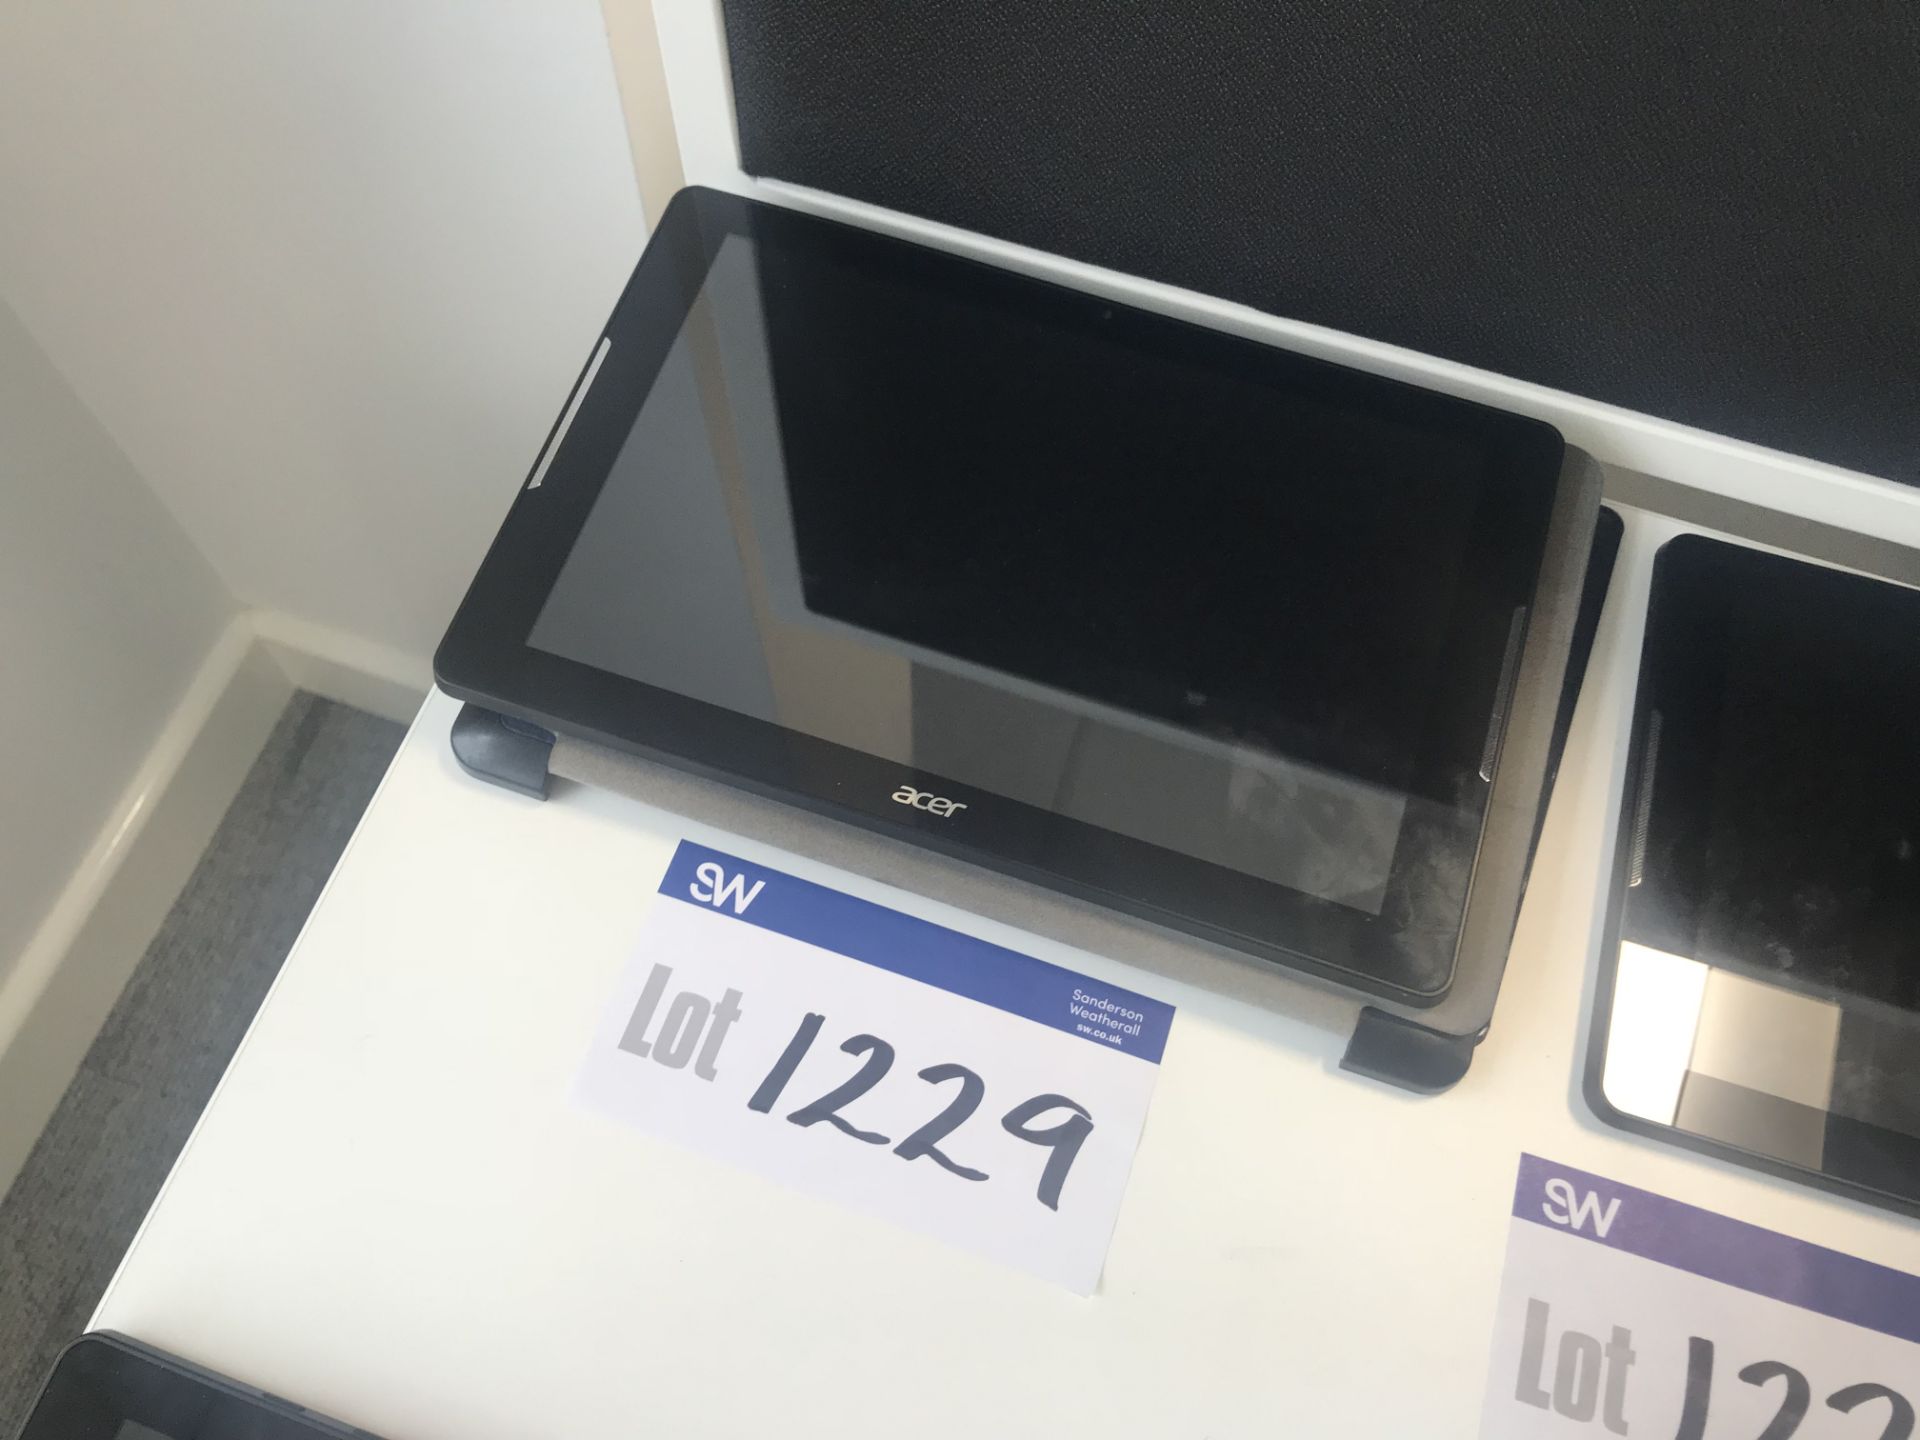 Acer Iconia 110 Tablet, Model: A6003, Serial Numbe